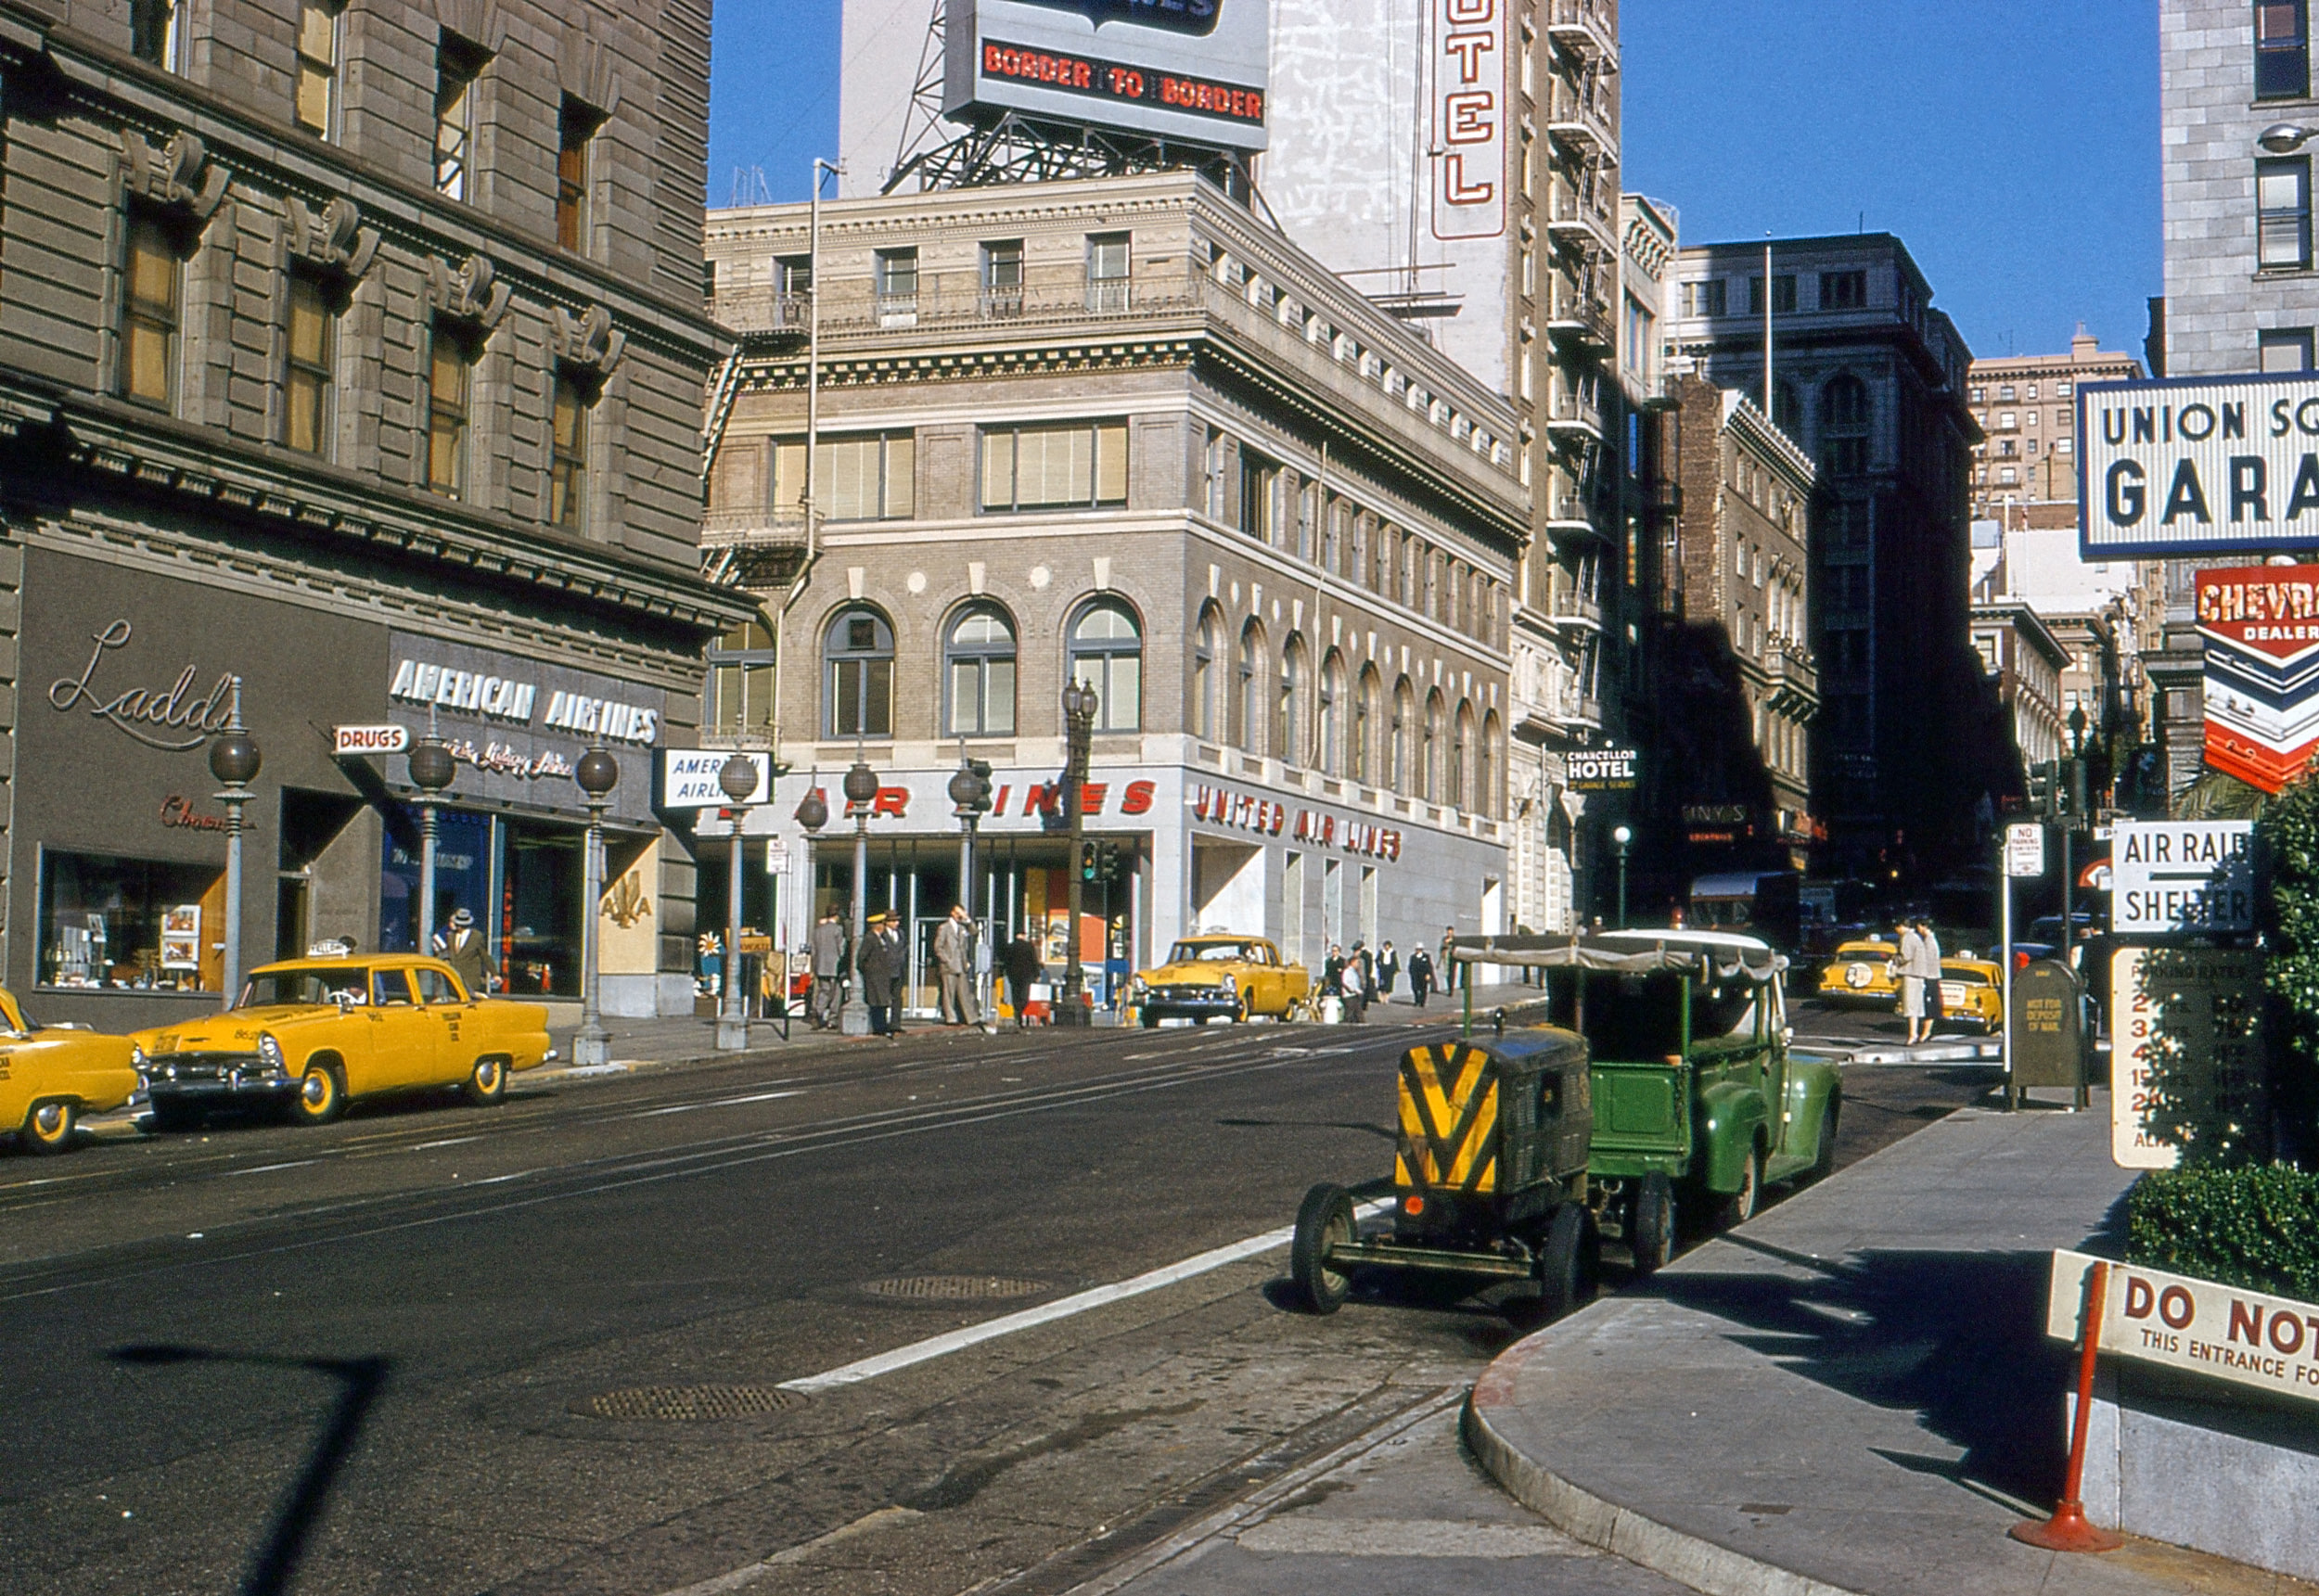 Union Square, San Francisco, looking north up Powell Street, circa 1958. I believe my parents were in America at the time to attend the 13th Junior Chamber International World Congress at the Hotel Leamington in Minneapolis; I am only assuming this as there is a transparency in the same container in a similar mount of the front of the hotel with a "Welcome JCI" sign under the veranda, so they may have all been photographed and processed around the same time period. If a Shorpy detective can narrow down the year that would be most welcome so I can date these transparencies in this album.

This Kodachrome transparency, taken by my father using a Kodak Retina 1a camera, is one of many that he had photographed over the years; I'm scanning the collection myself, using an Epson V370 photo & slide scanner. As I progress through all the transparencies I will post some more of the interesting late '50s America images here. View full size.